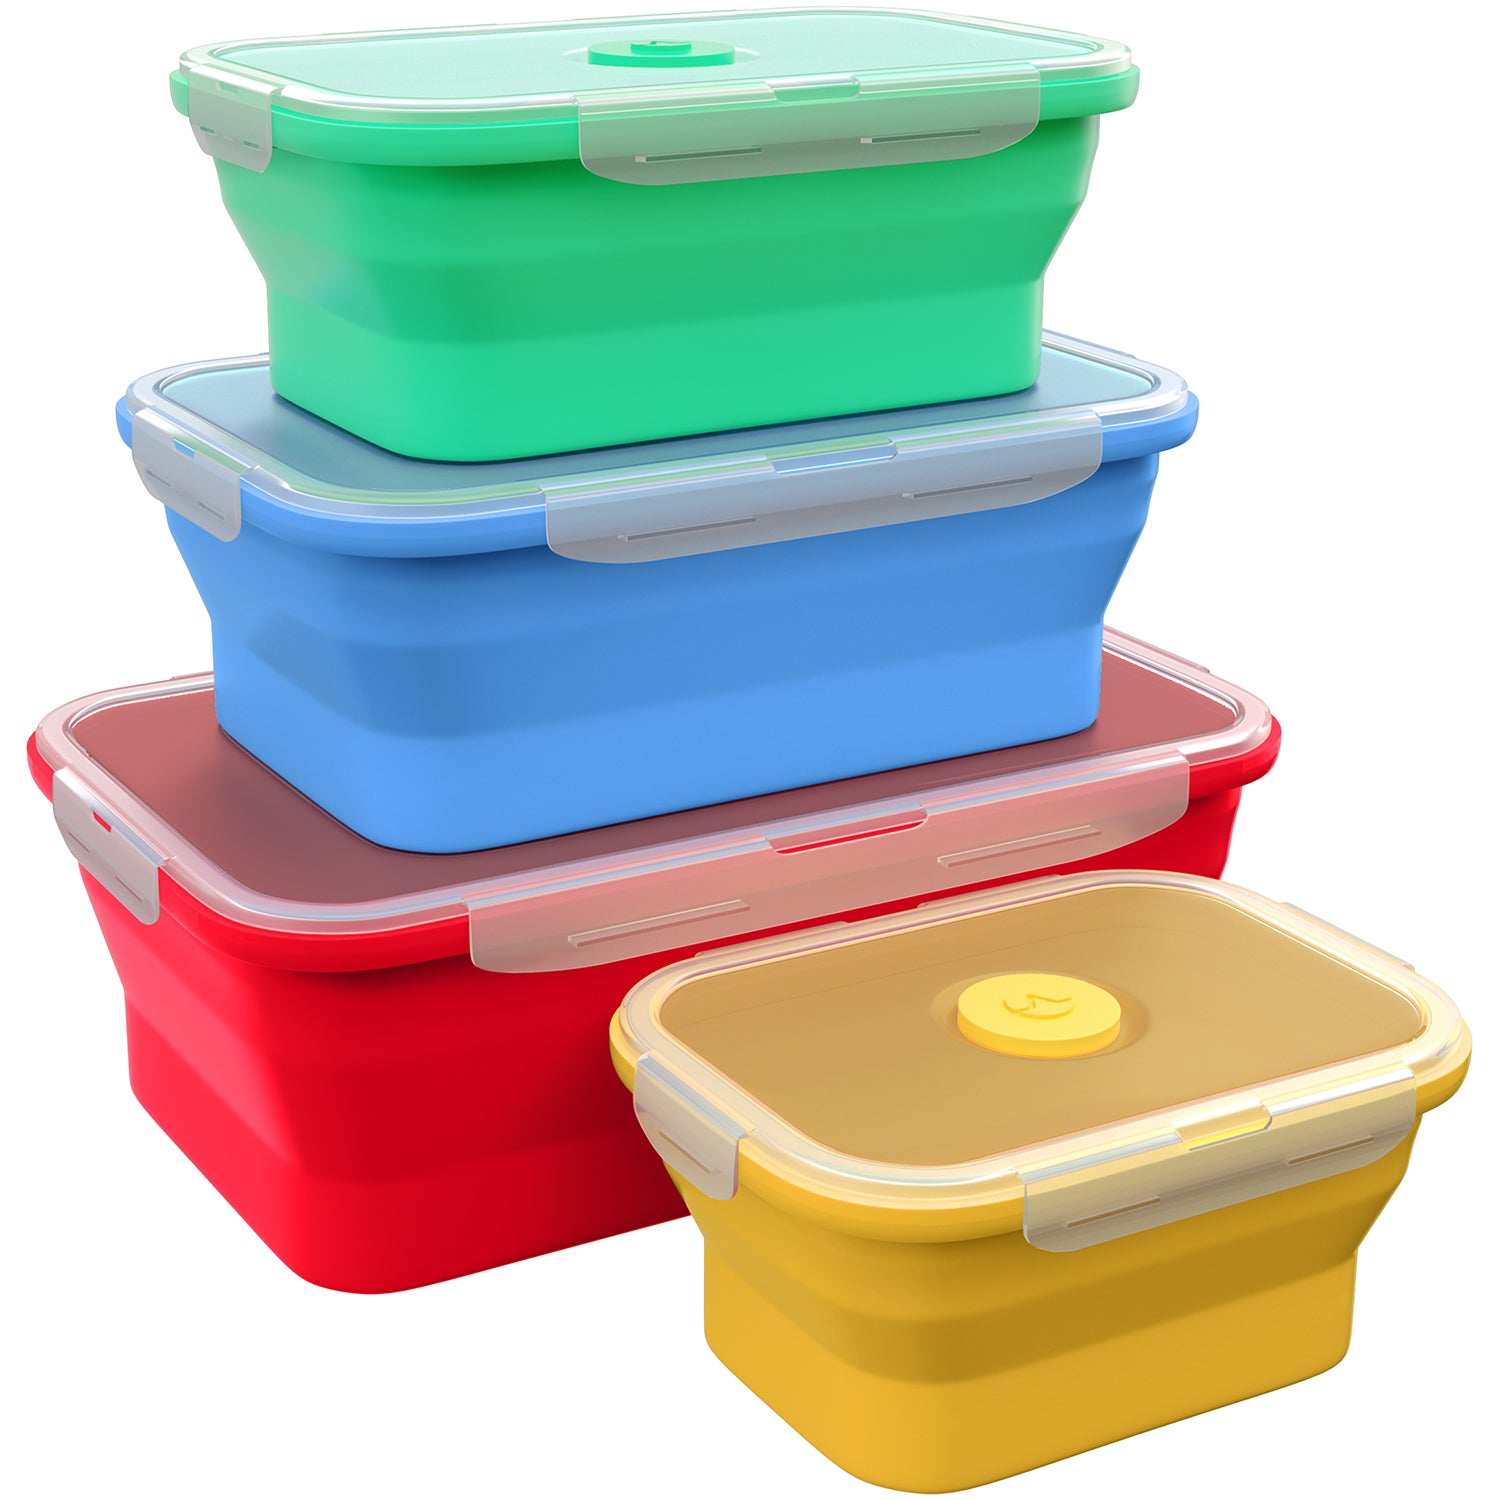 Food Grade Microwave Use Meal Prep Container with 4 Dividers Food Storage  Foldable Silicone Bento Box - China Food Container and Silicone Food  Container price